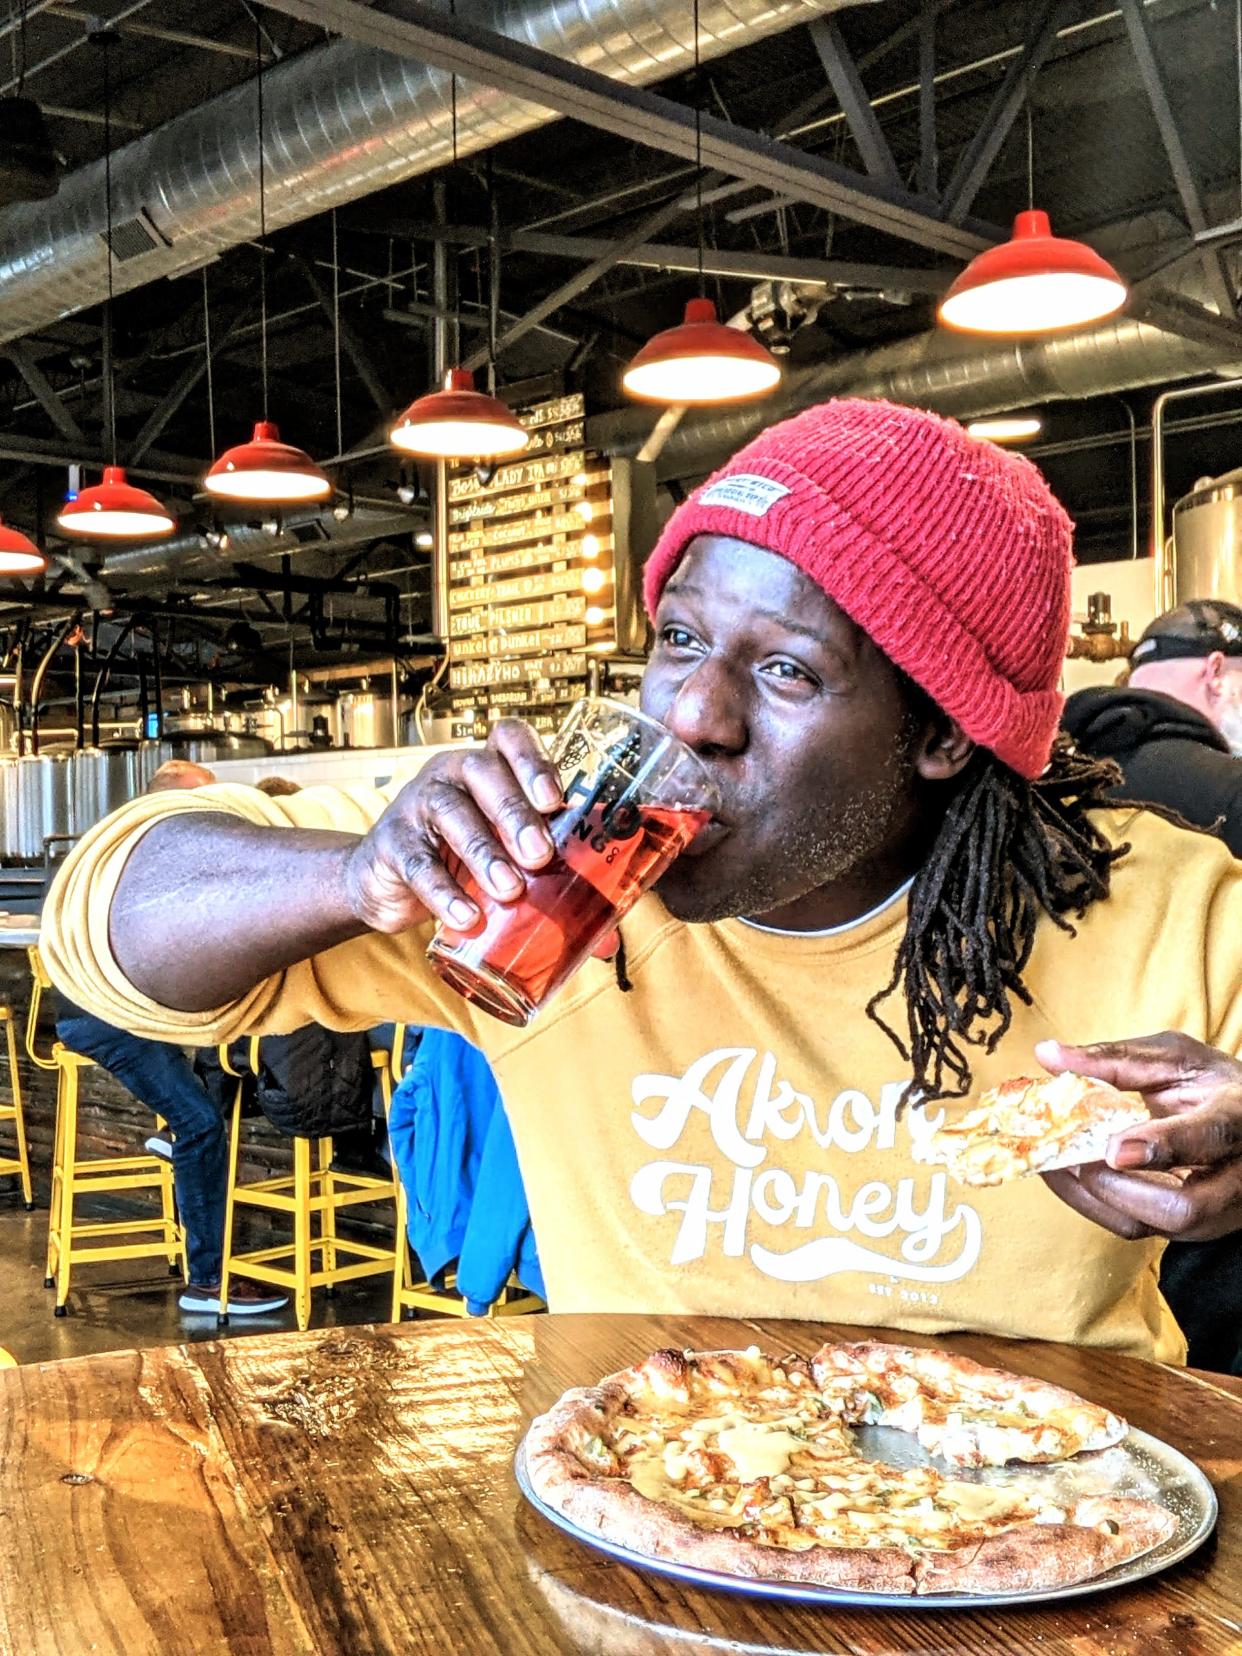 Brent Wesley, owner of Akron Honey, is partnering with HiHO Brewing Co. for the second year for a takeover featuring Akron Honey-flavored beers and foods.